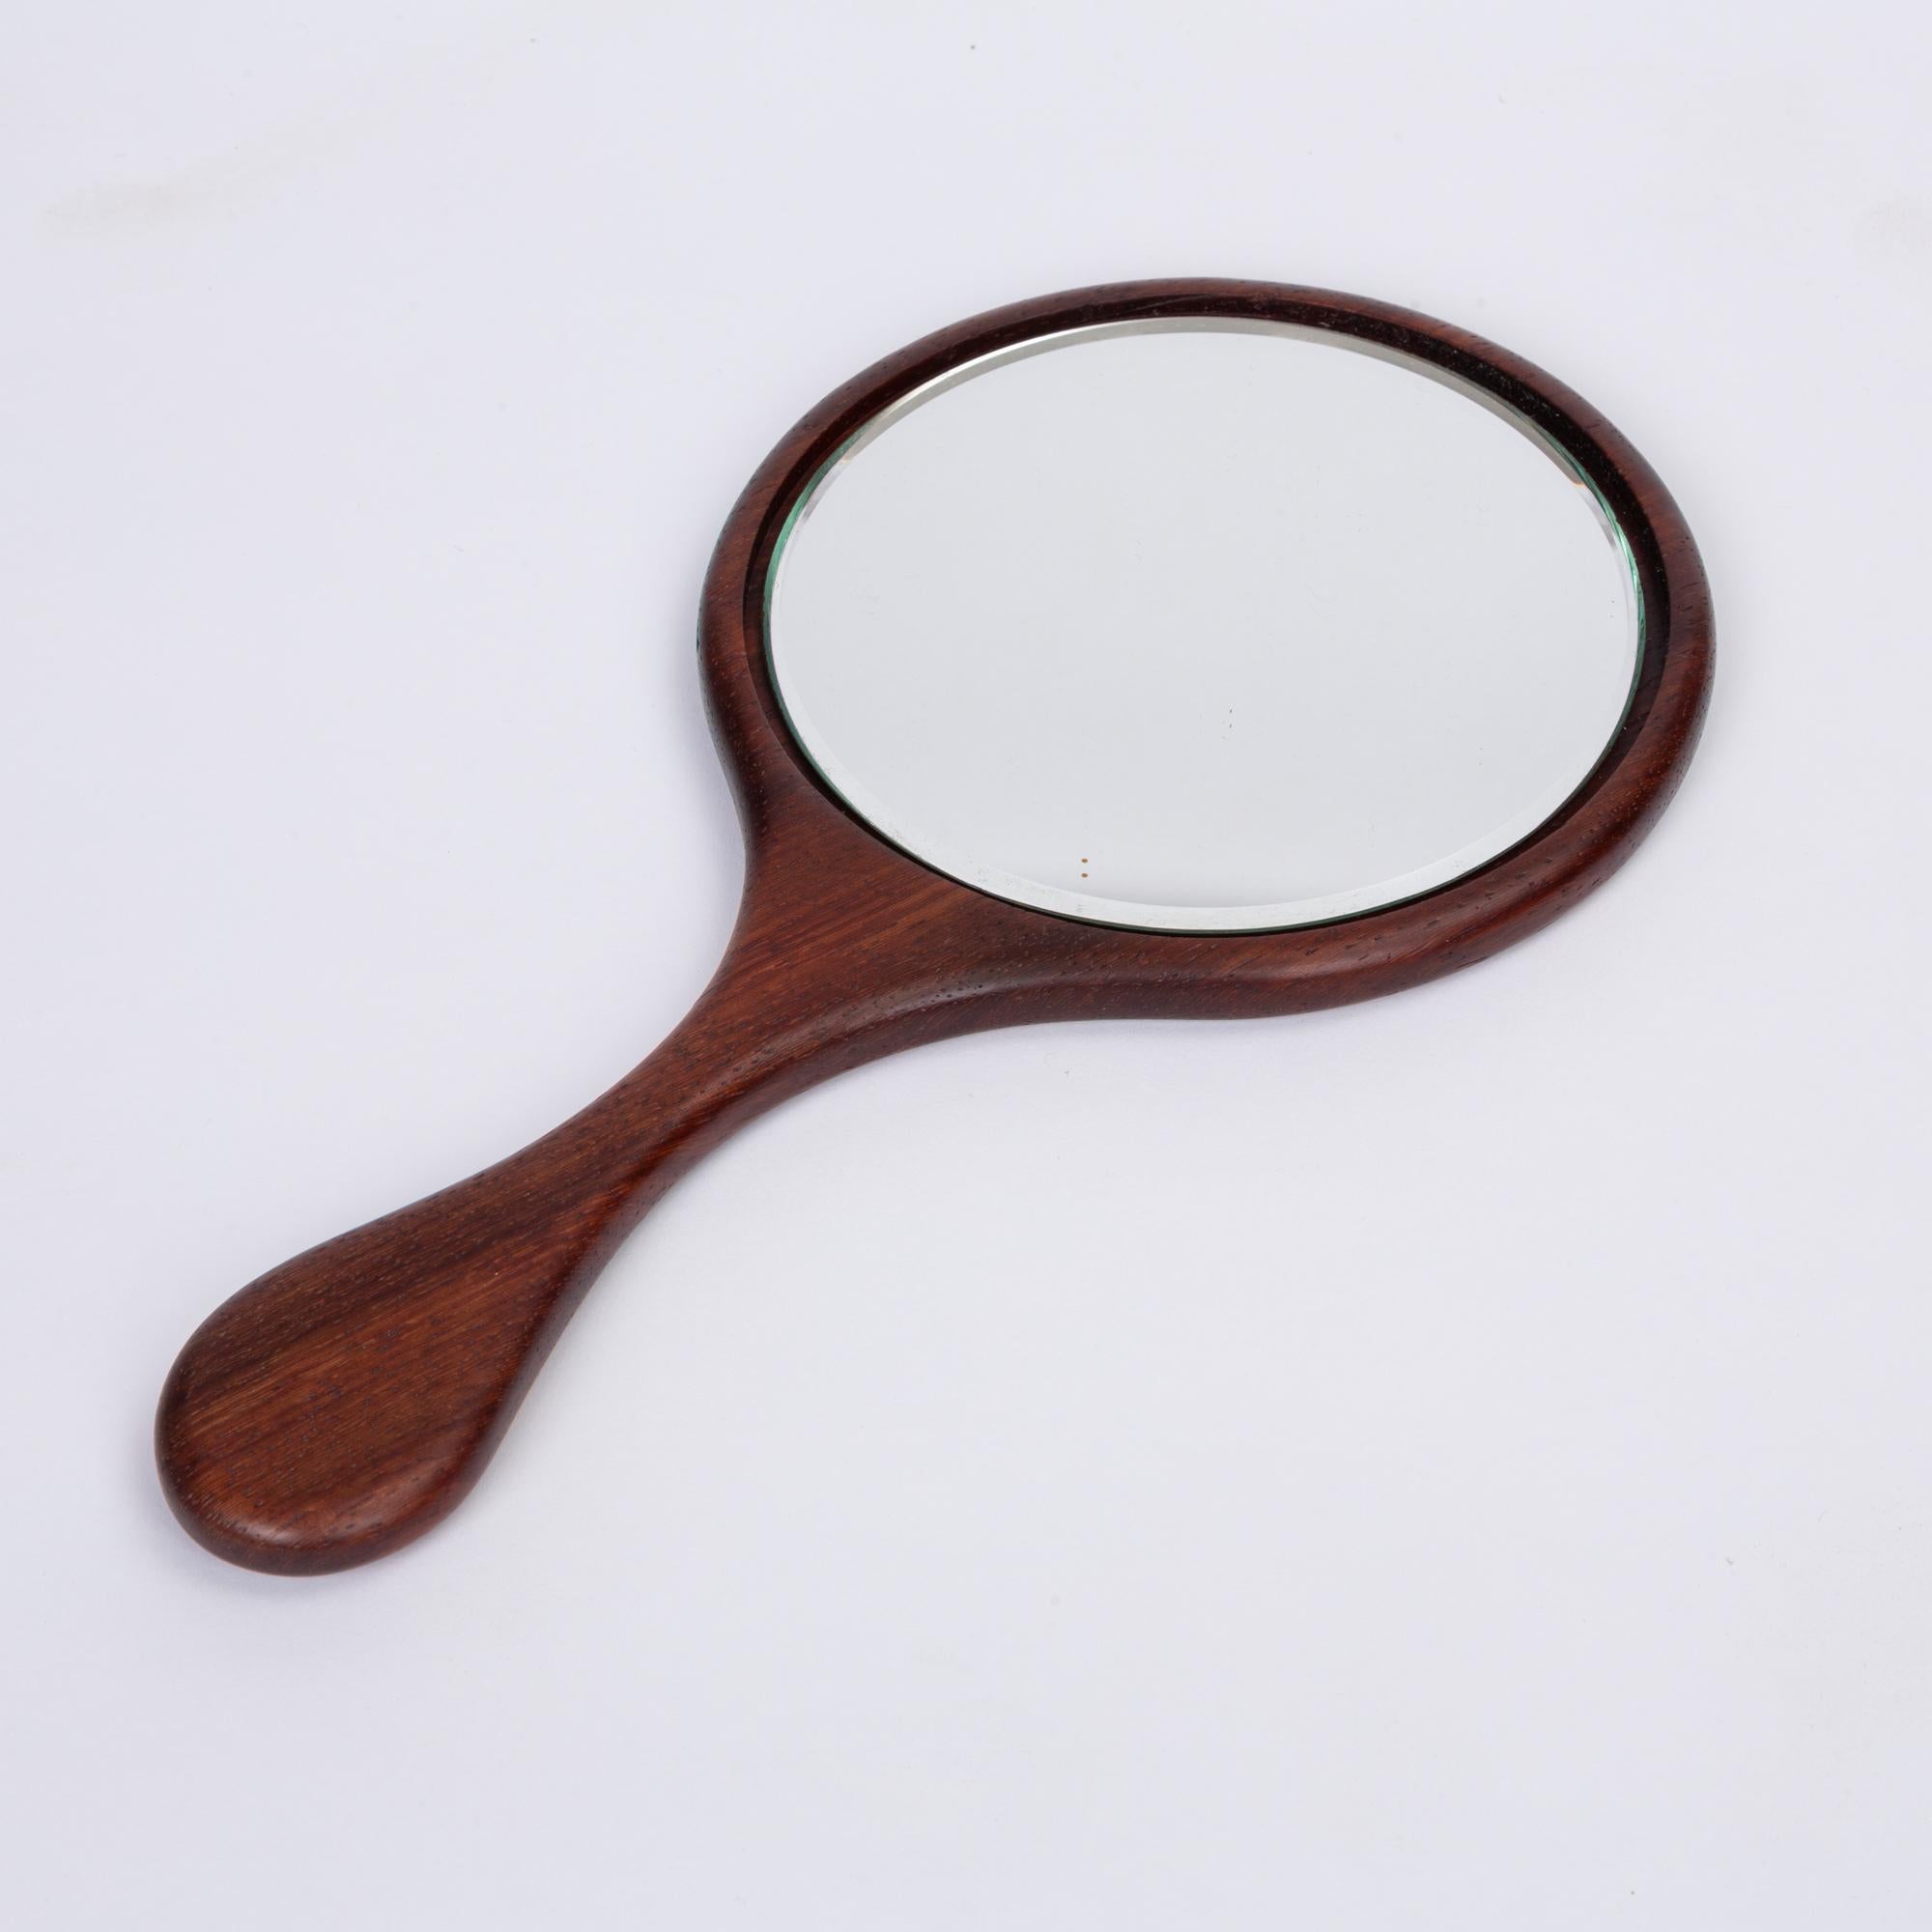 Vintage rosewood hand mirror with hand carved organic shaped handle. The mirror features a highly figured rosewood handle and frame, with a 5” piece of mirror glass inset into the frame. There is a small border separating the glass from the frame